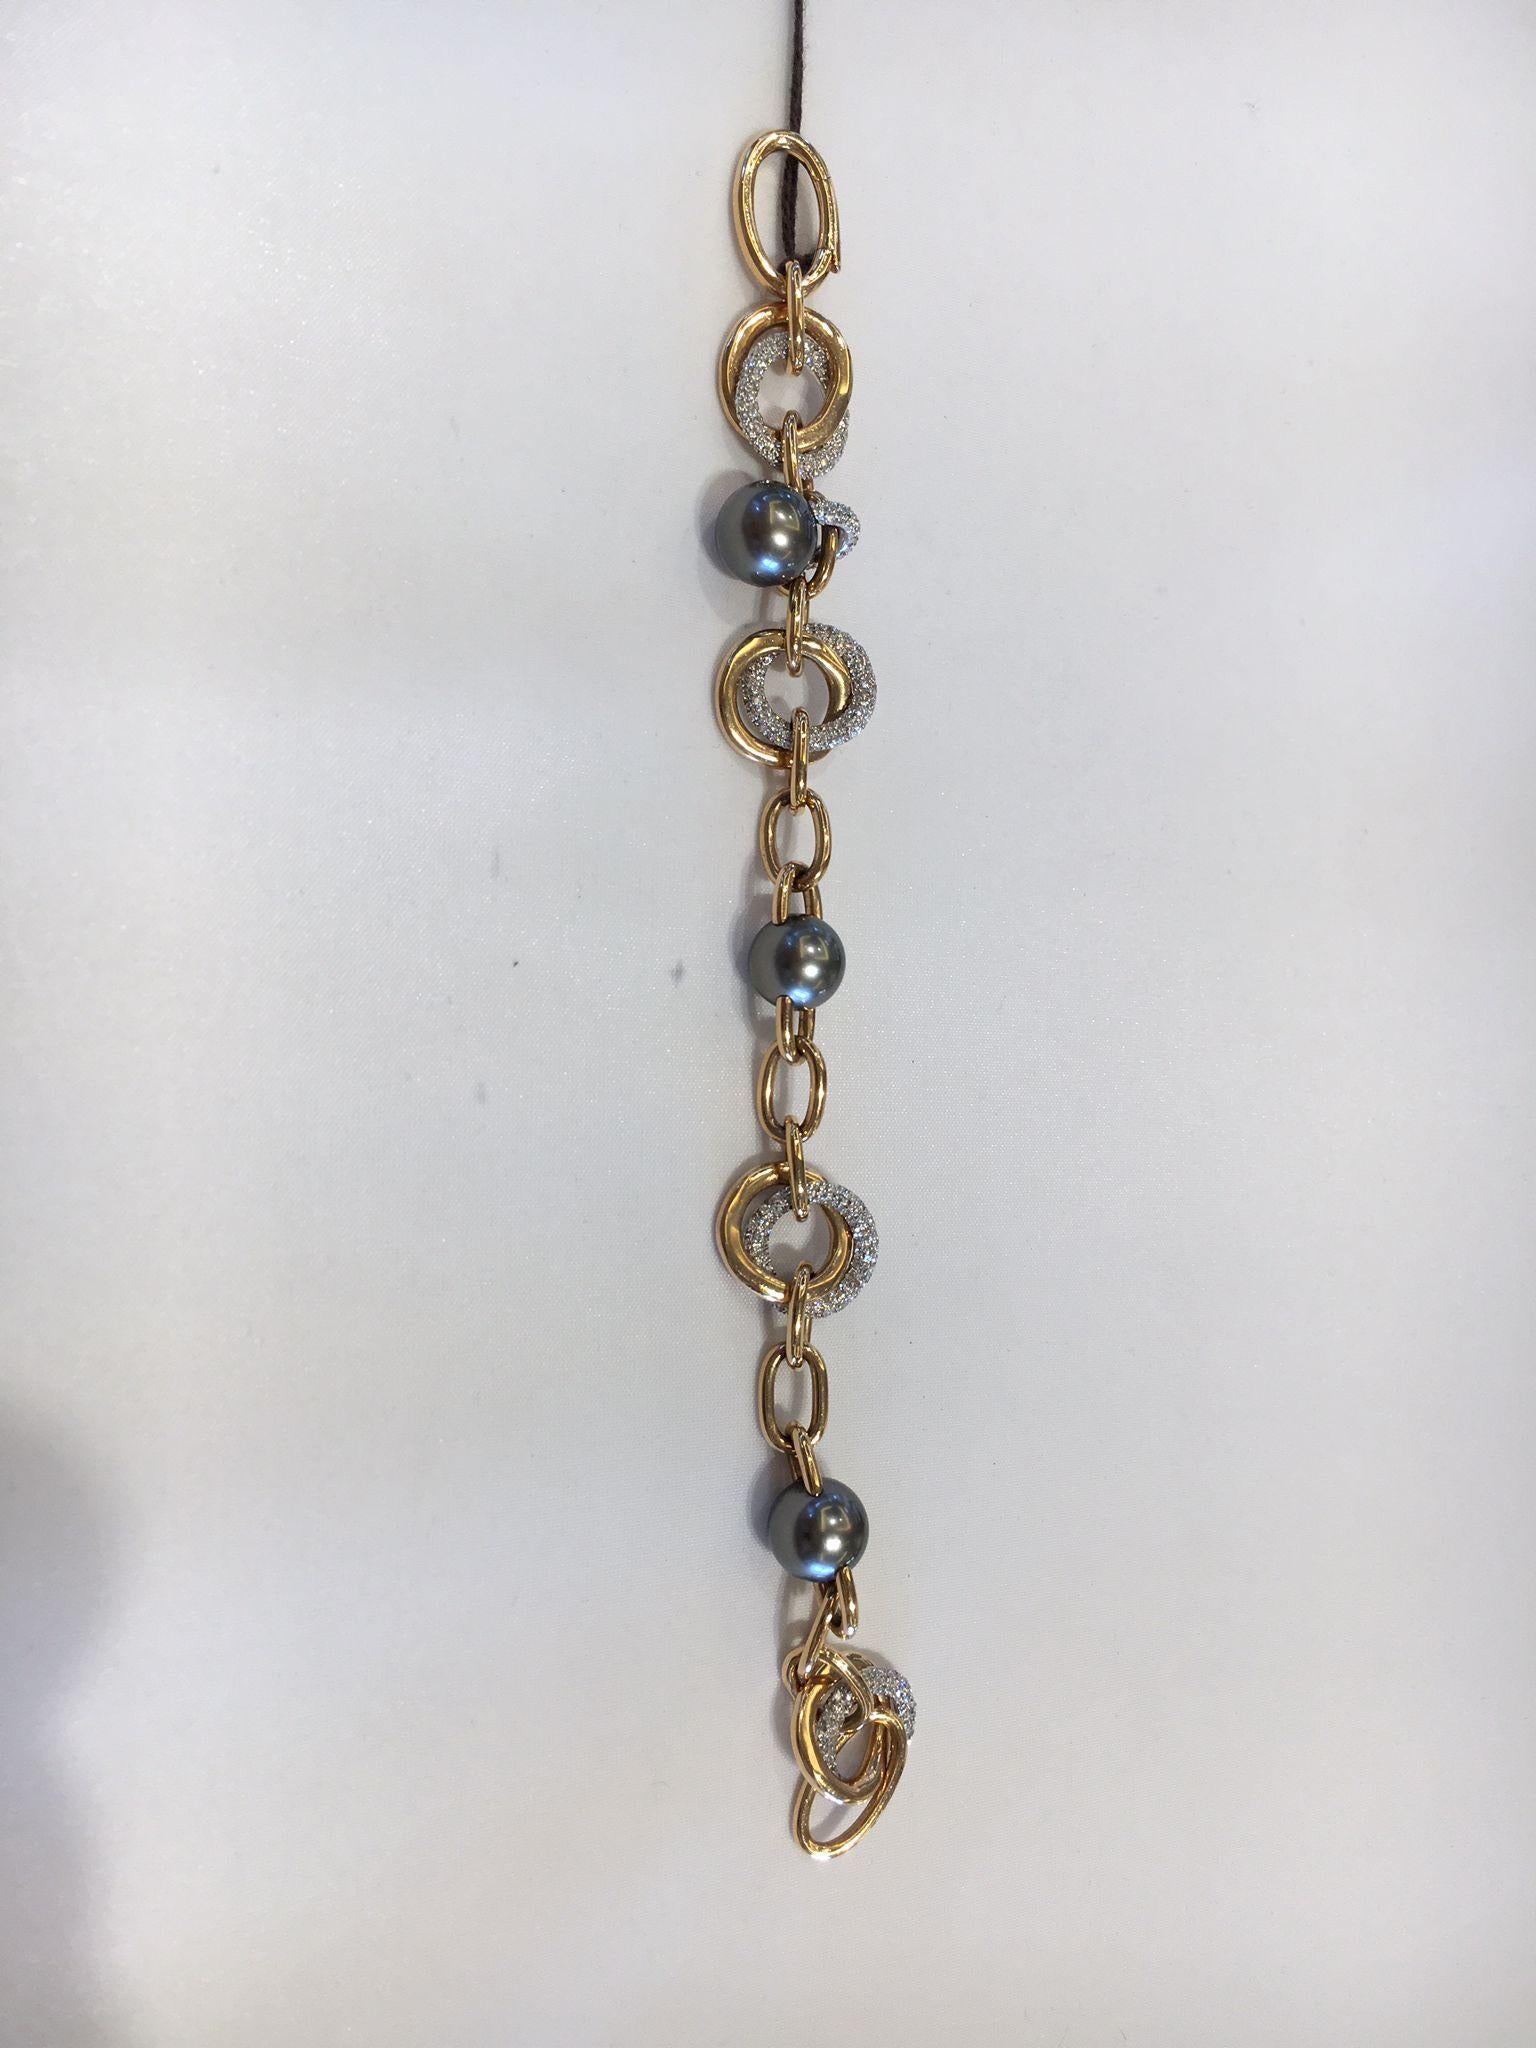 5A+ Thaitian pearl bracelet in 18kt white&rose gold with diamonds by Mikimoto.
beautiful and timeless bracelet made by Mikimoto in our stock since 2008.
The bracelet is made with black pearls from Thaiti, and it come with the Mikimoto guarantee and